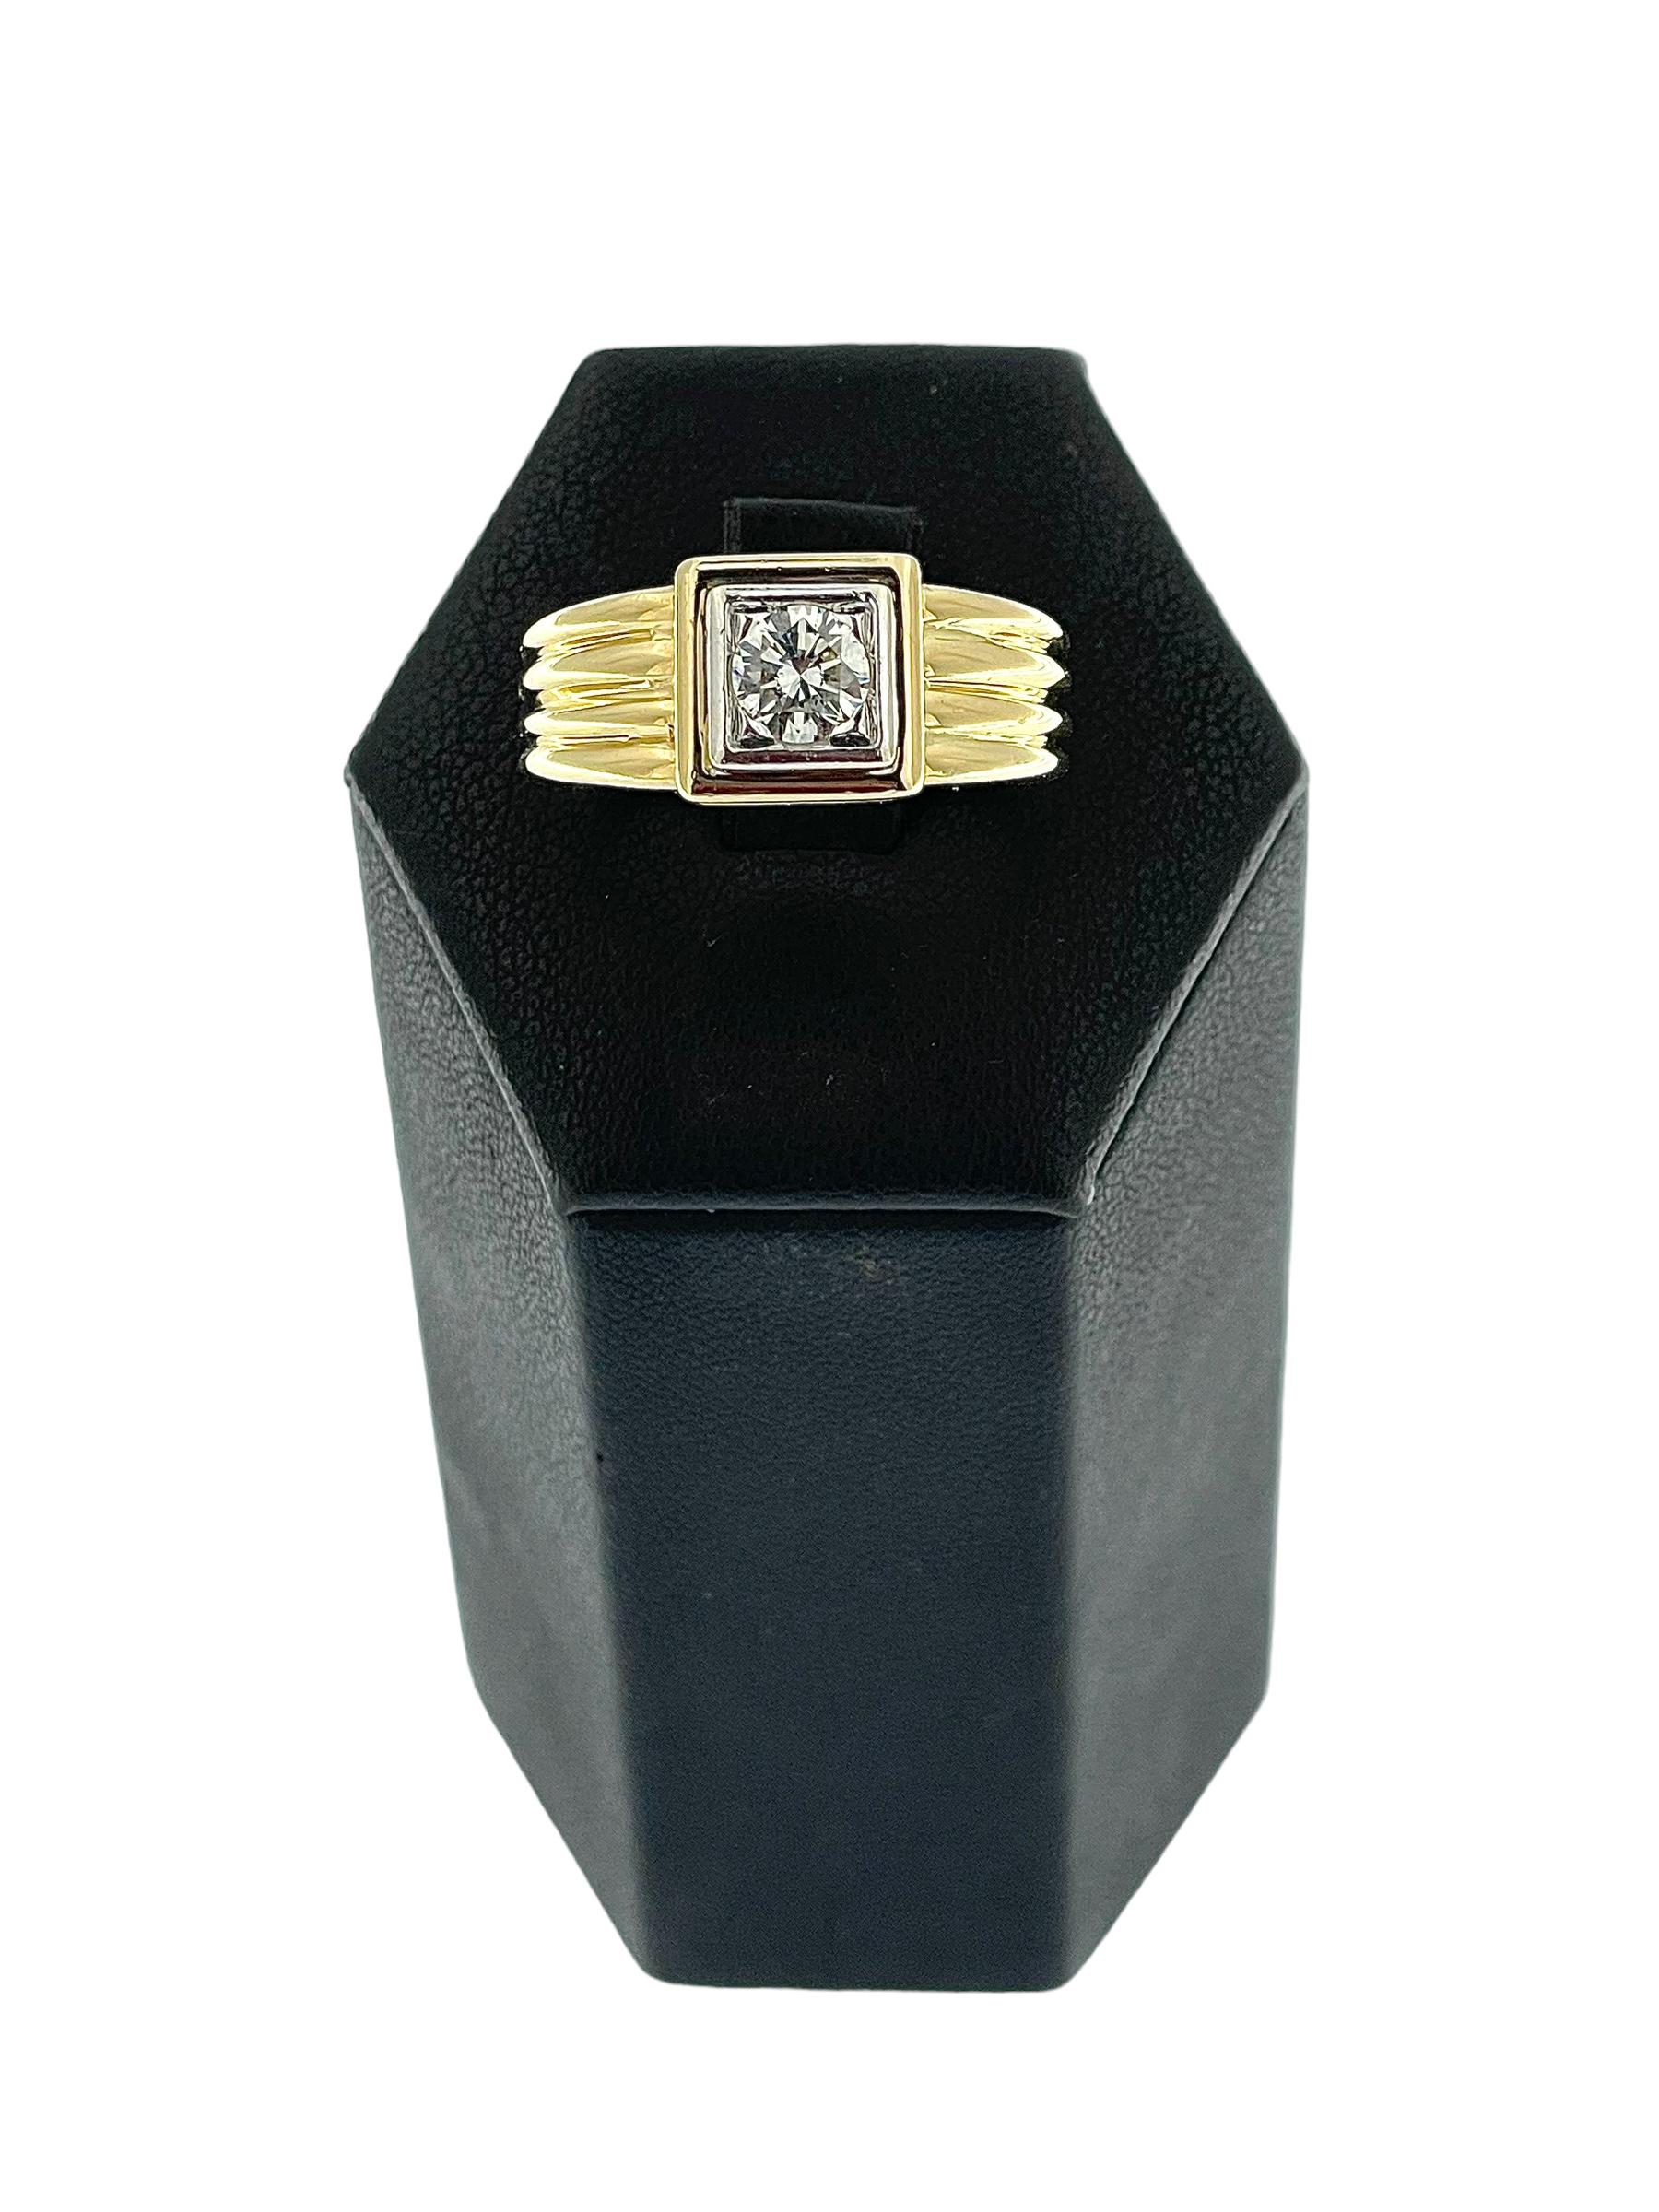 HRD Certified Signet Diamond Ring Yellow and White Gold For Sale 2